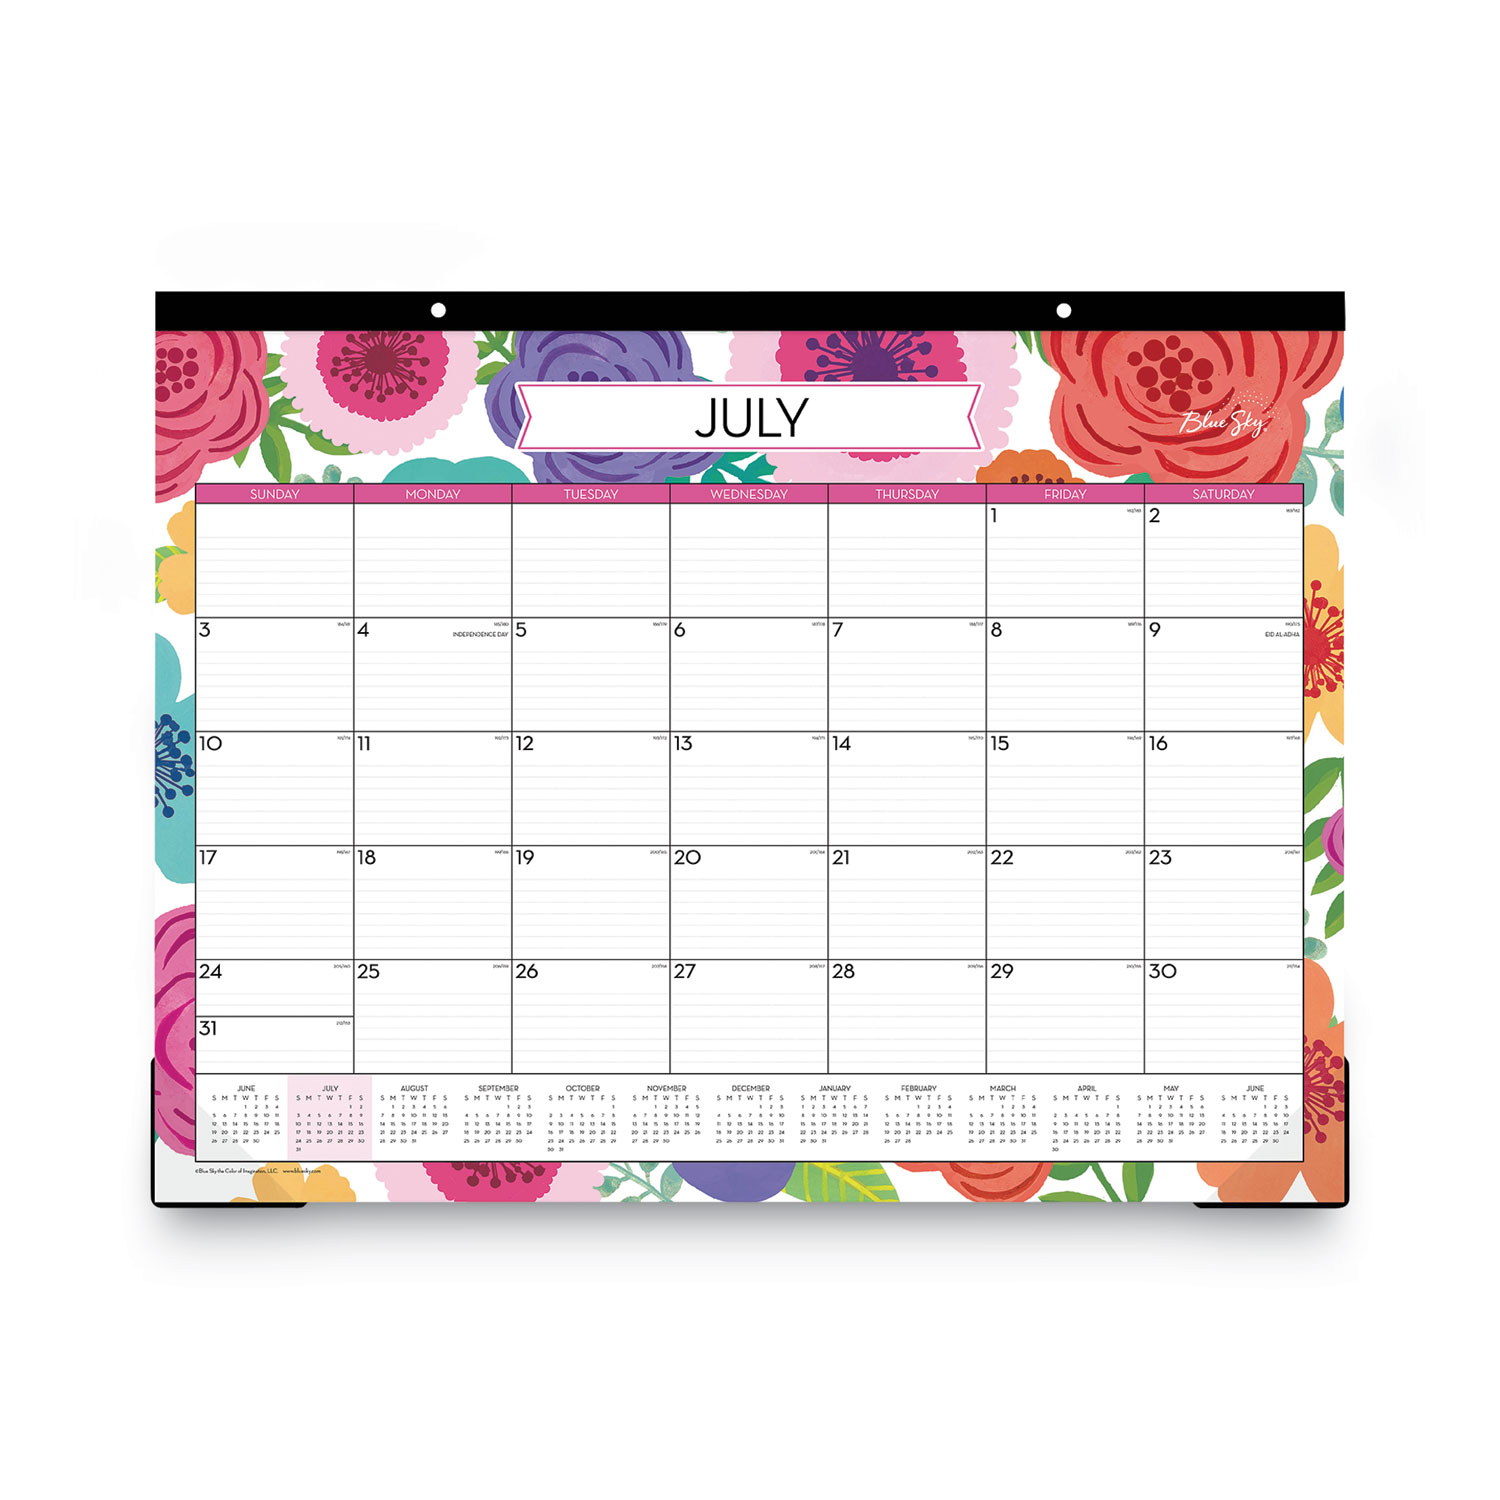 22 x 17 Blue Sky 2020 Monthly Desk Pad Calendar Two-Hole Punched Baccara Dark Ruled Blocks 